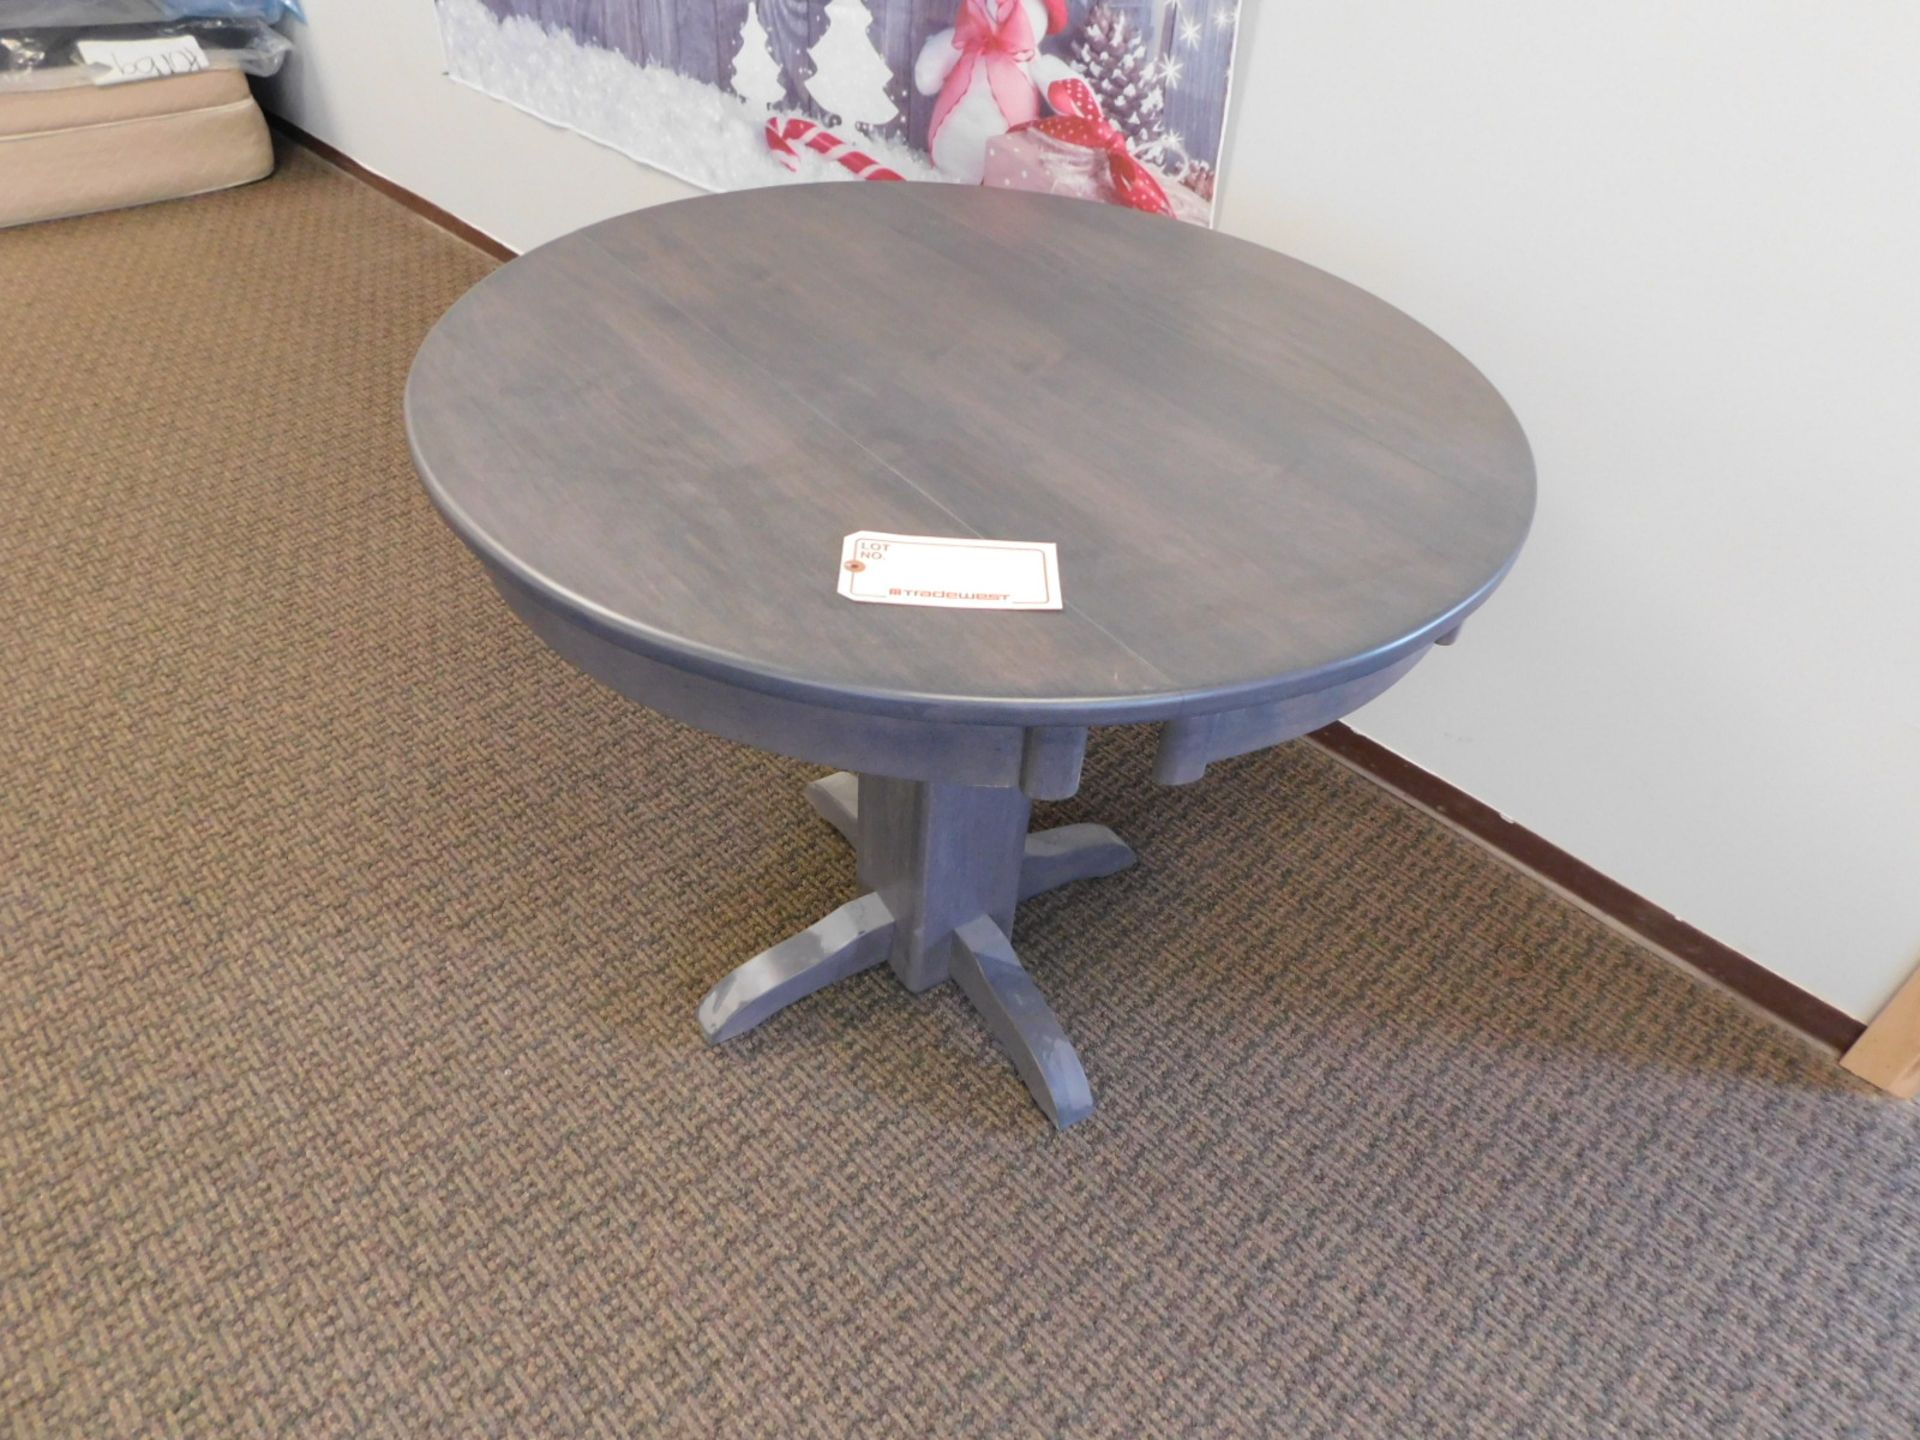 36" ROUND TABLE W/ DROP DOWNS